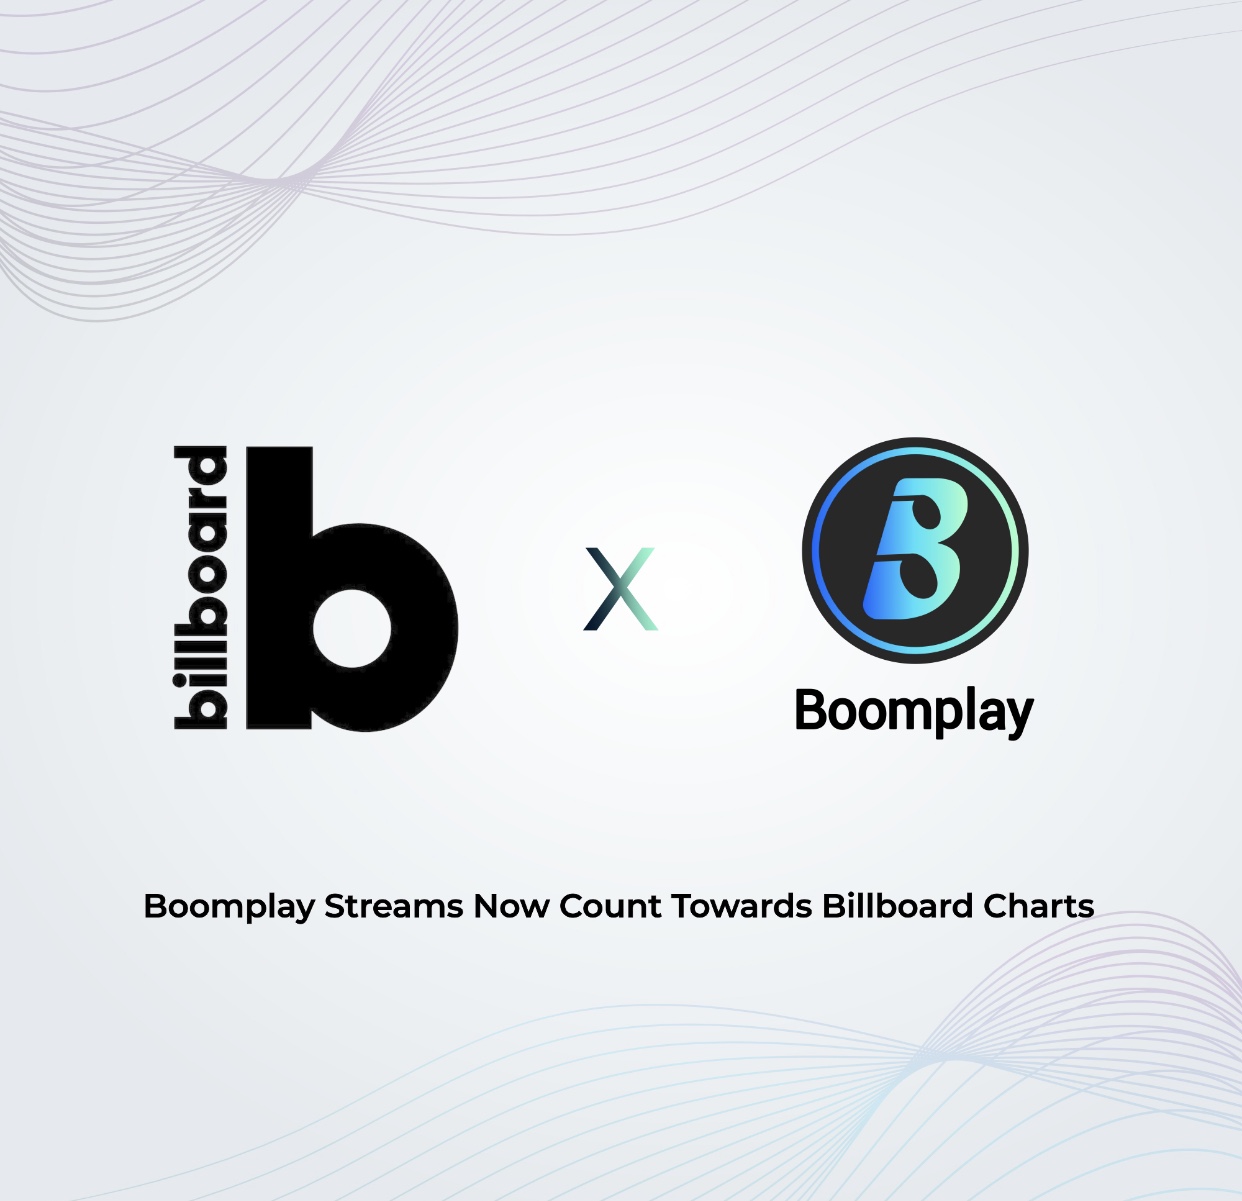 Boomplay streams now feed into data for Billboard charts